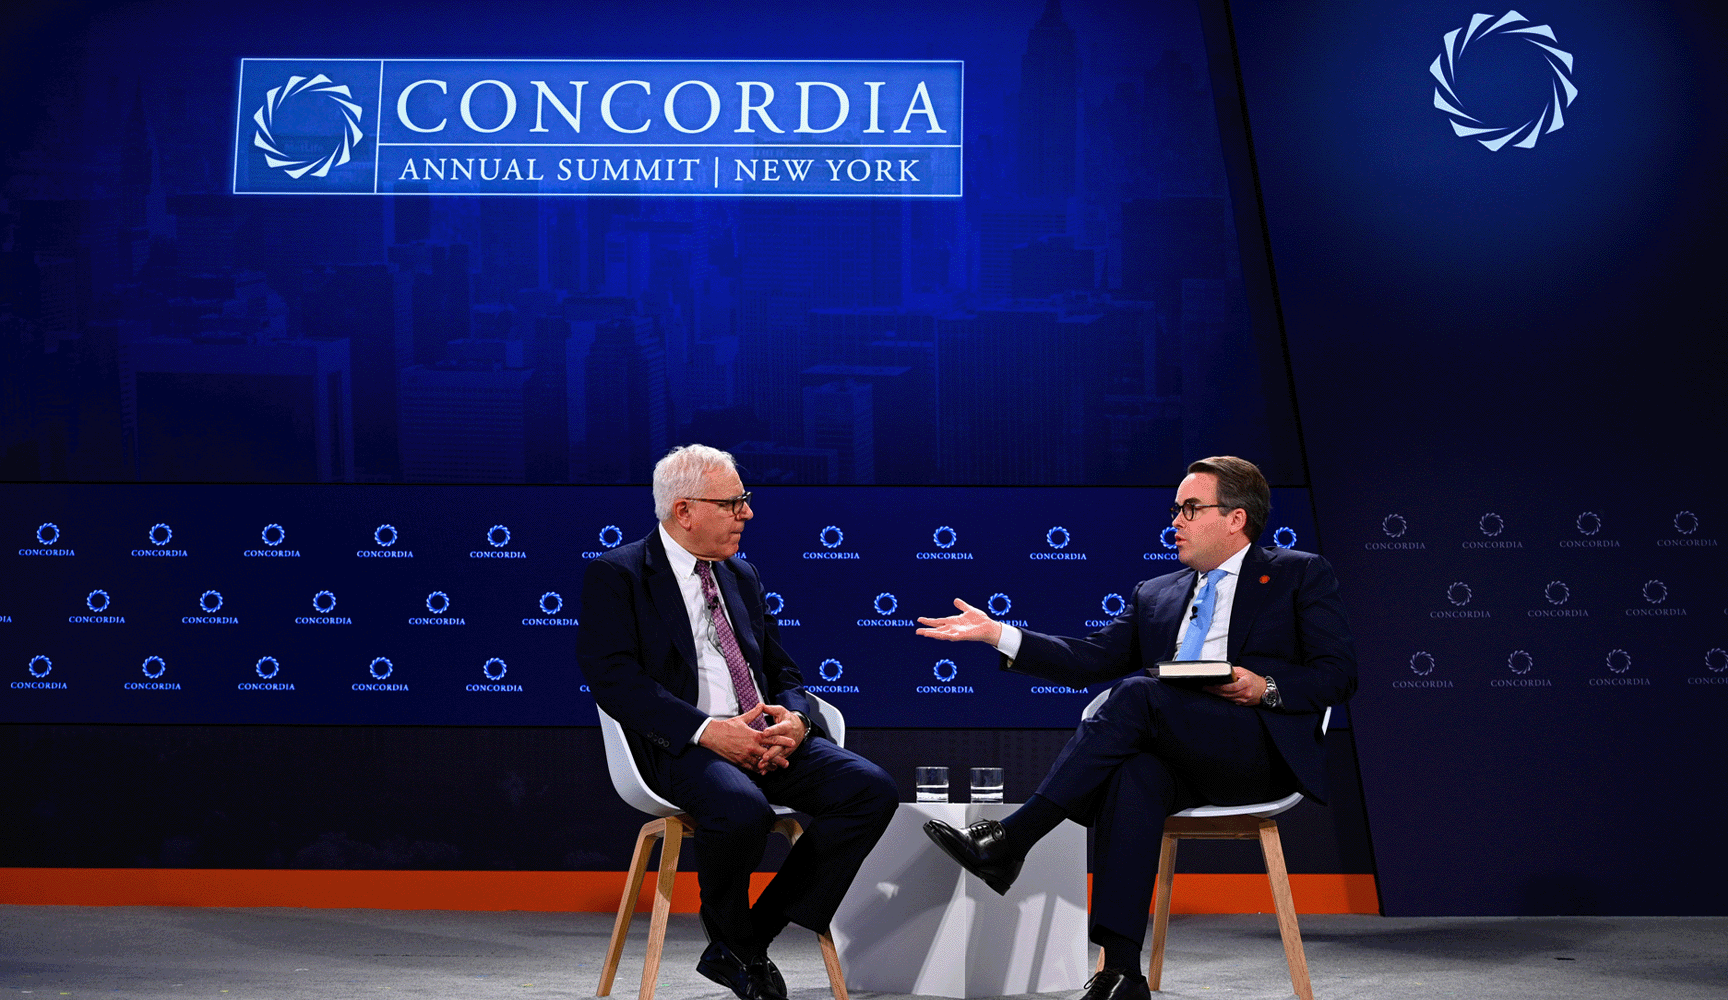 Two men on stage at the Concordia event